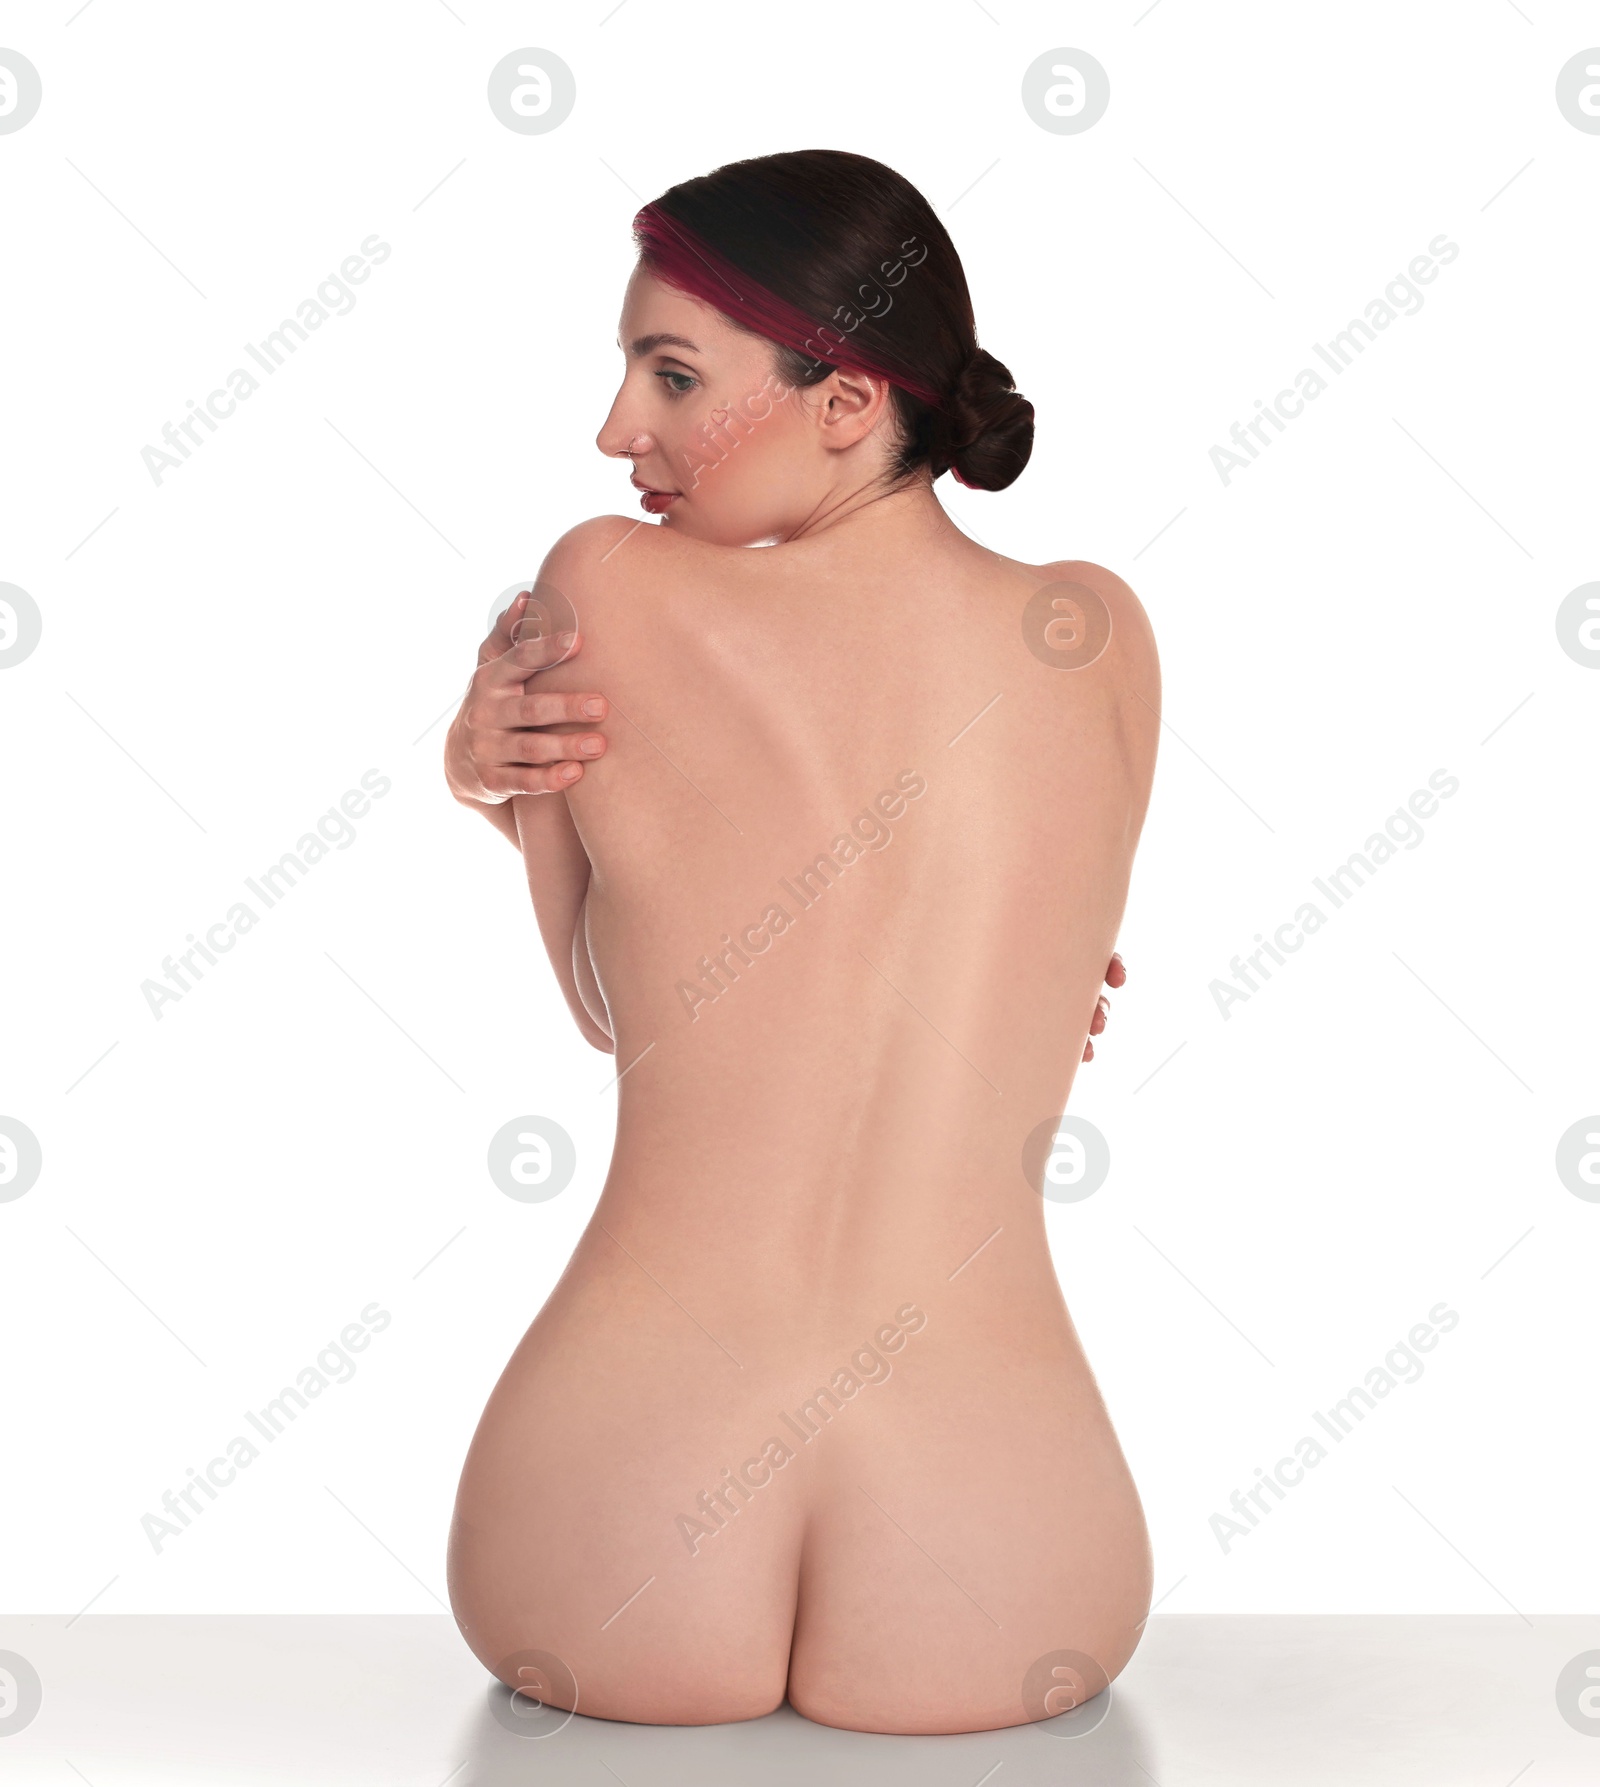 Photo of Nude woman posing on white background, back view